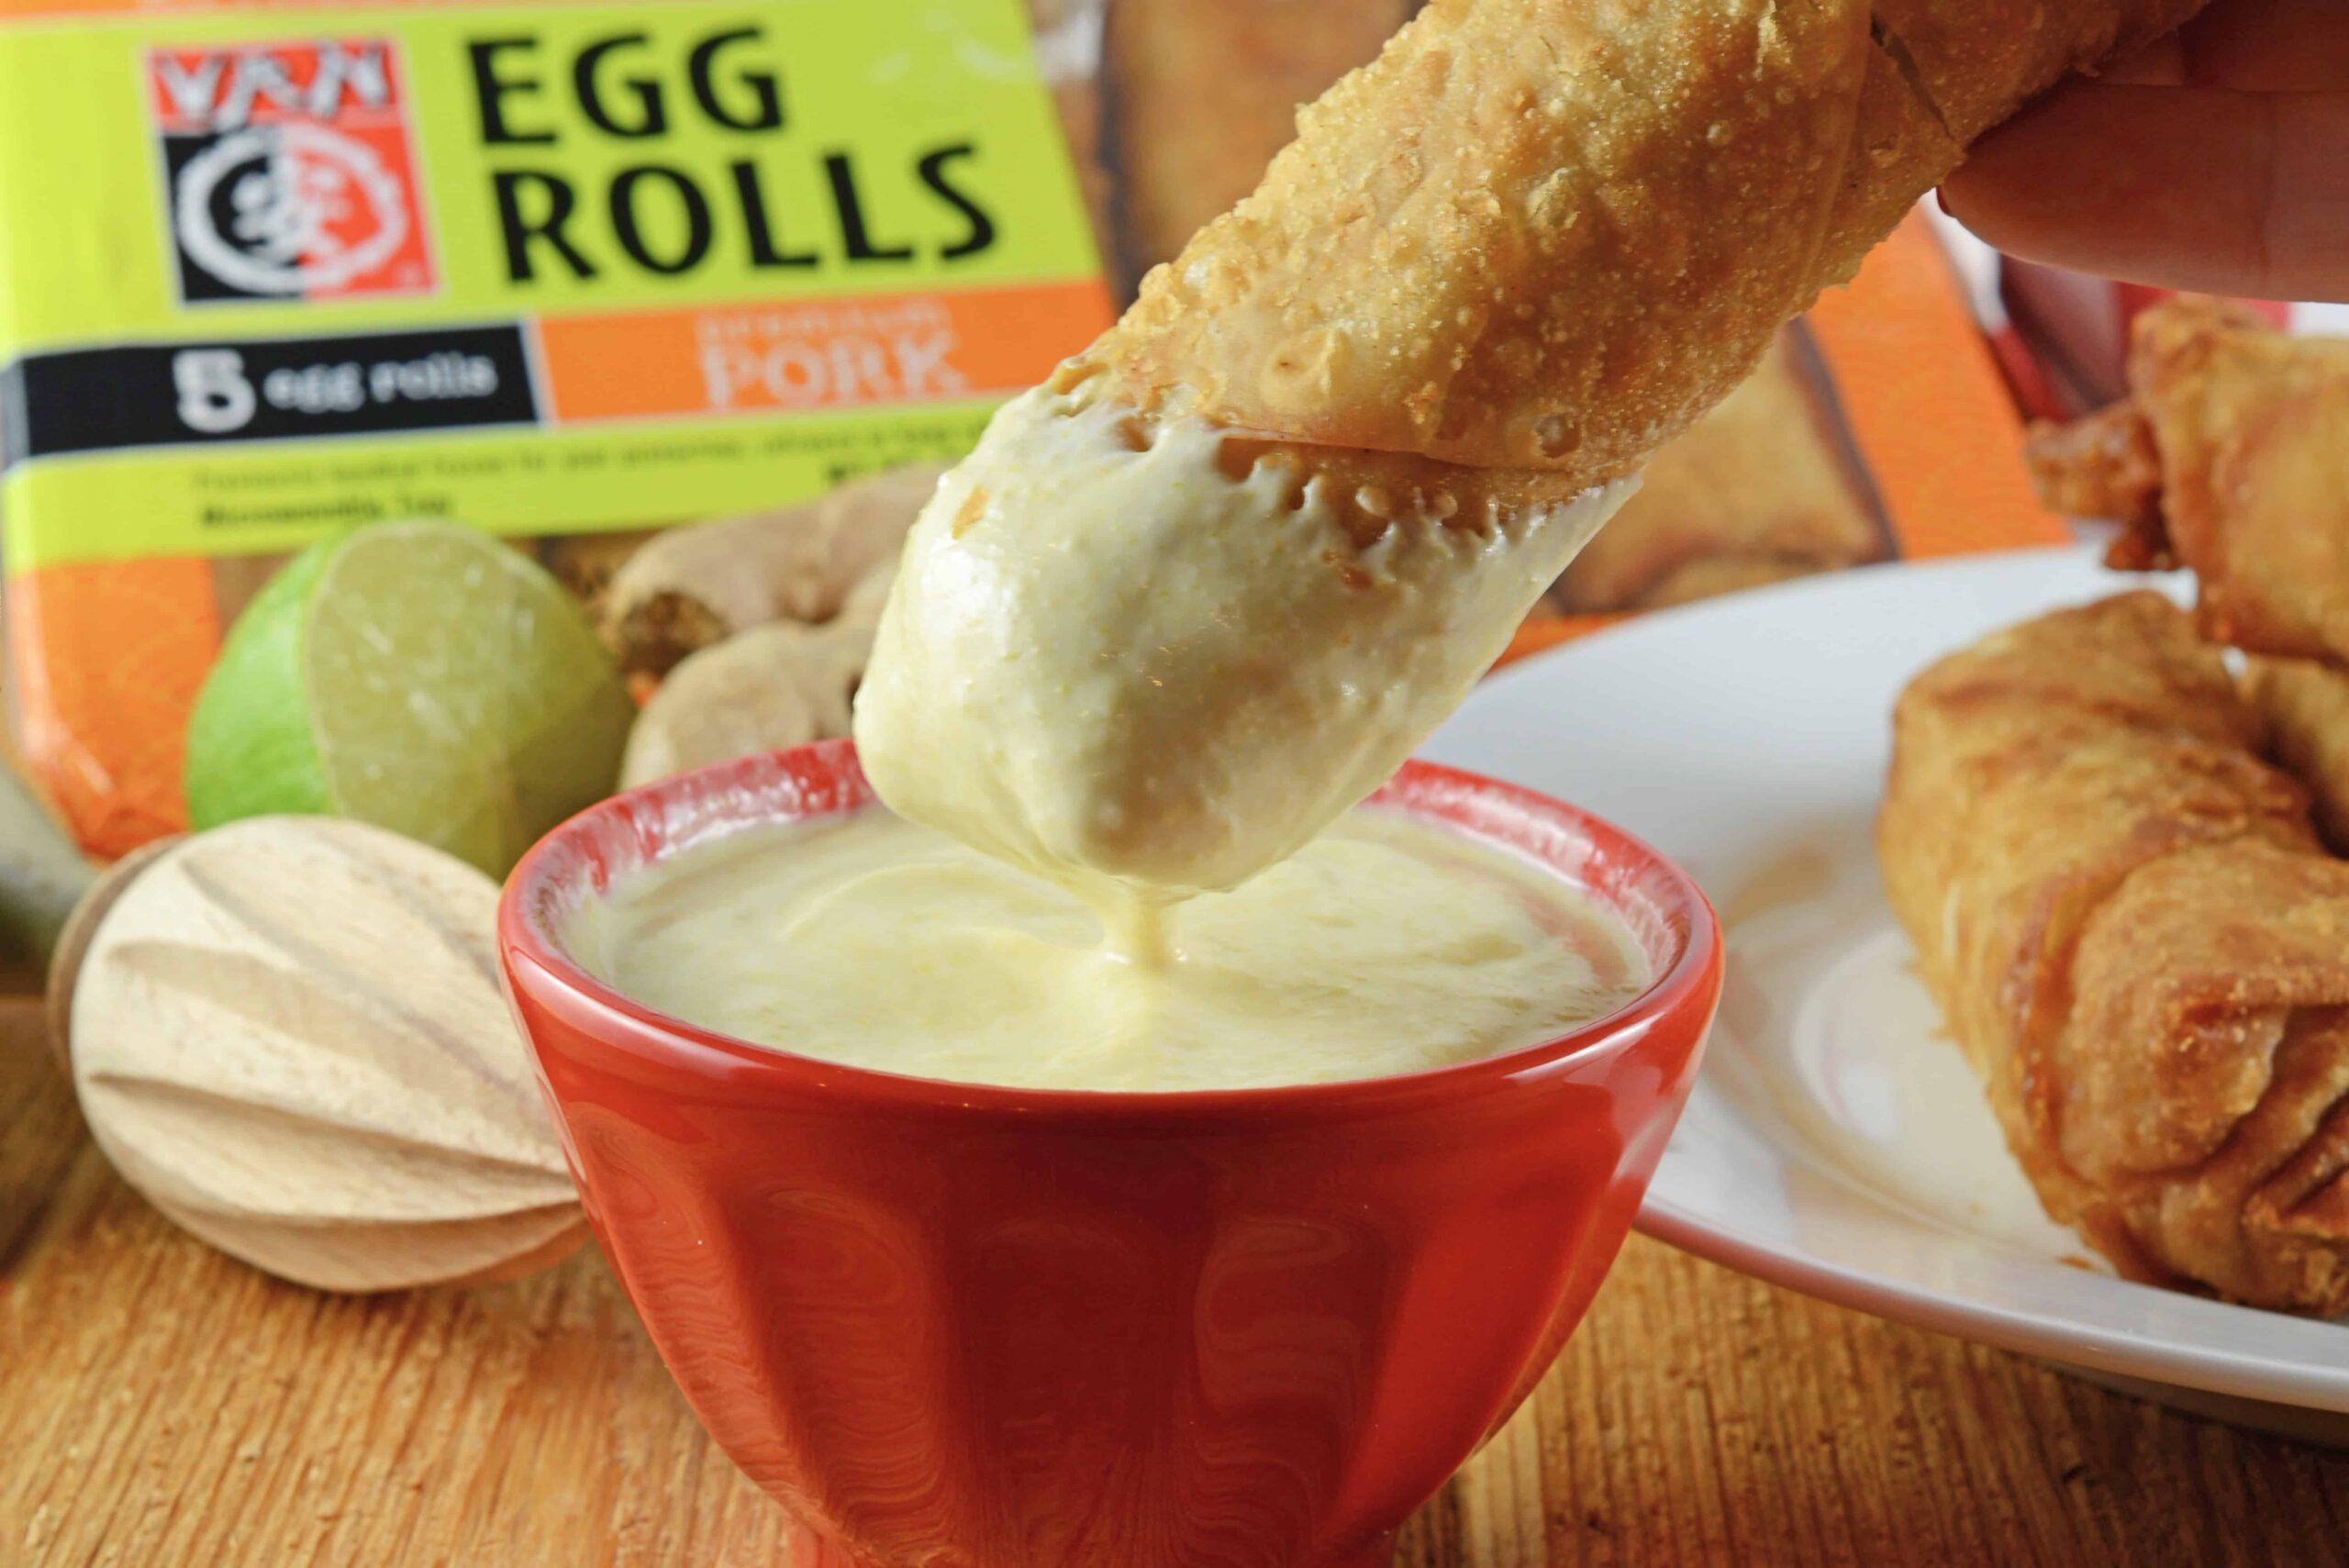 egg roll dipping into a coconut curry sauce in a red bowl